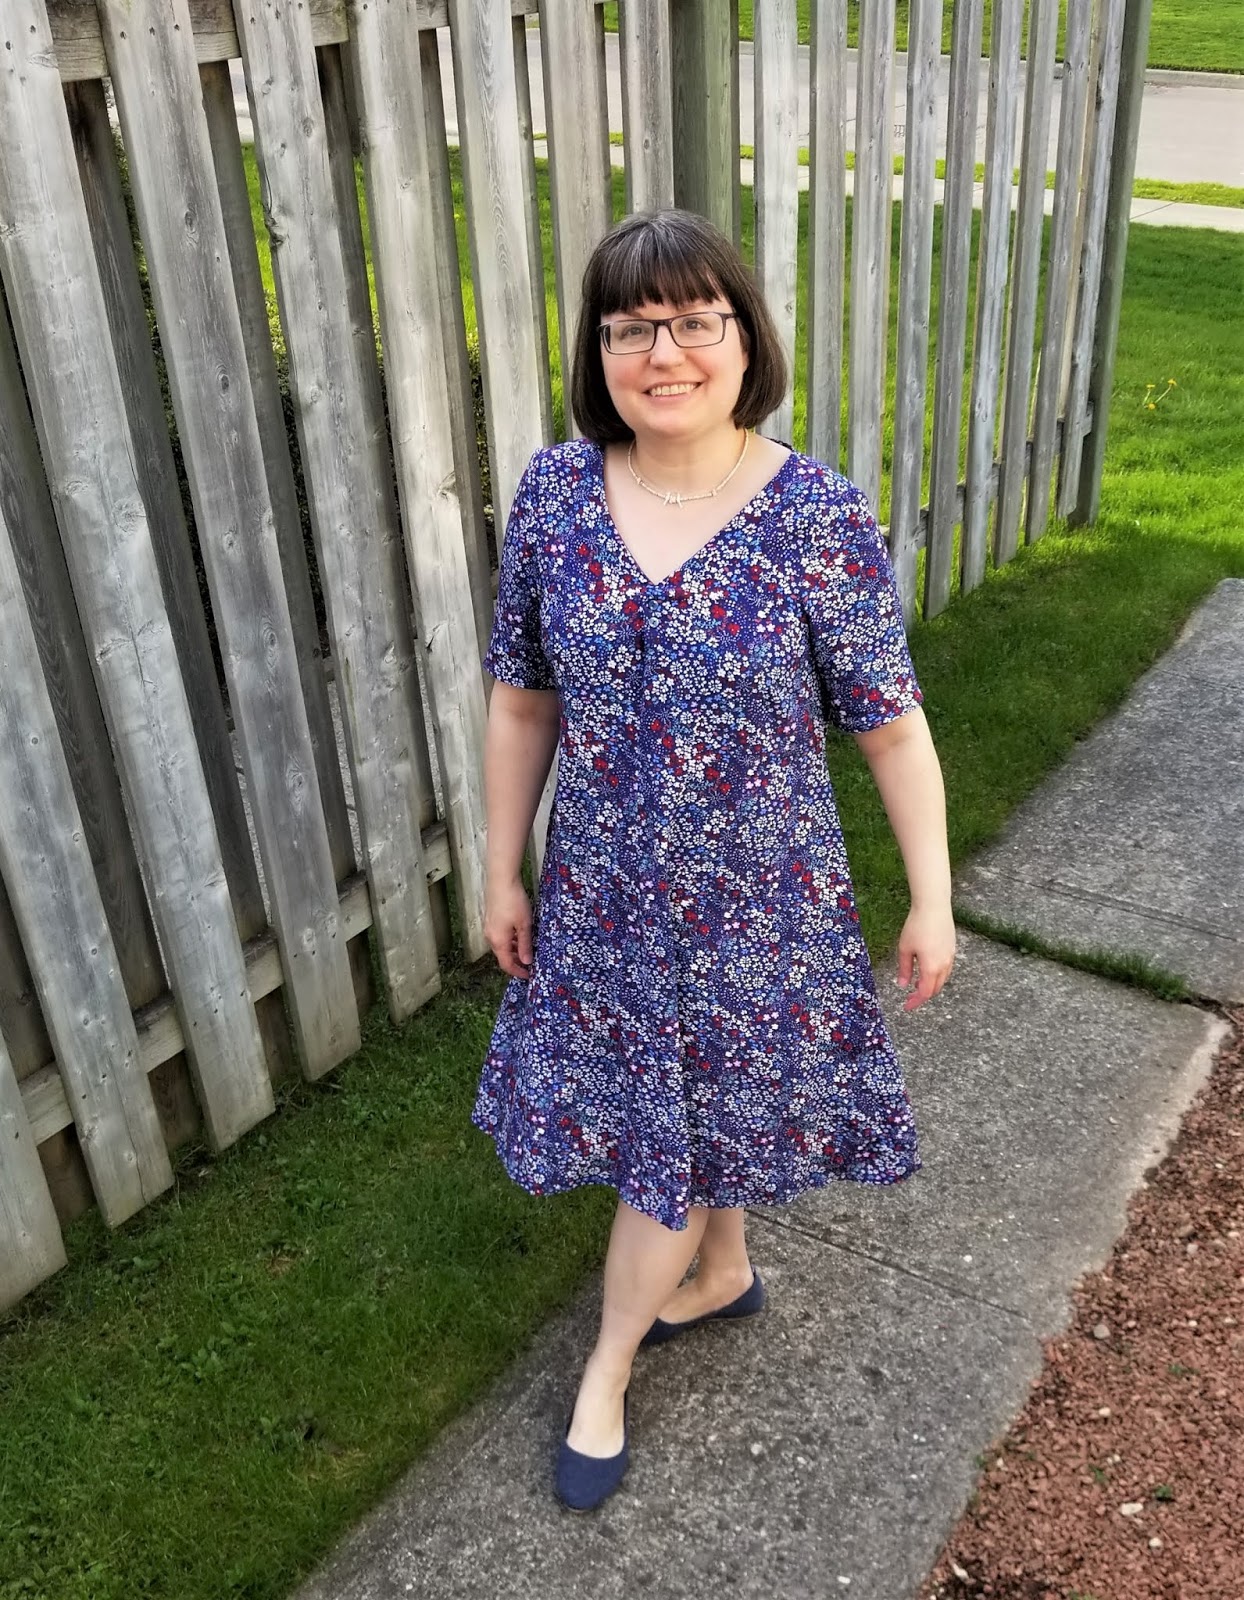 Following The Thread: New Look 6340 in sparkling floral rayon